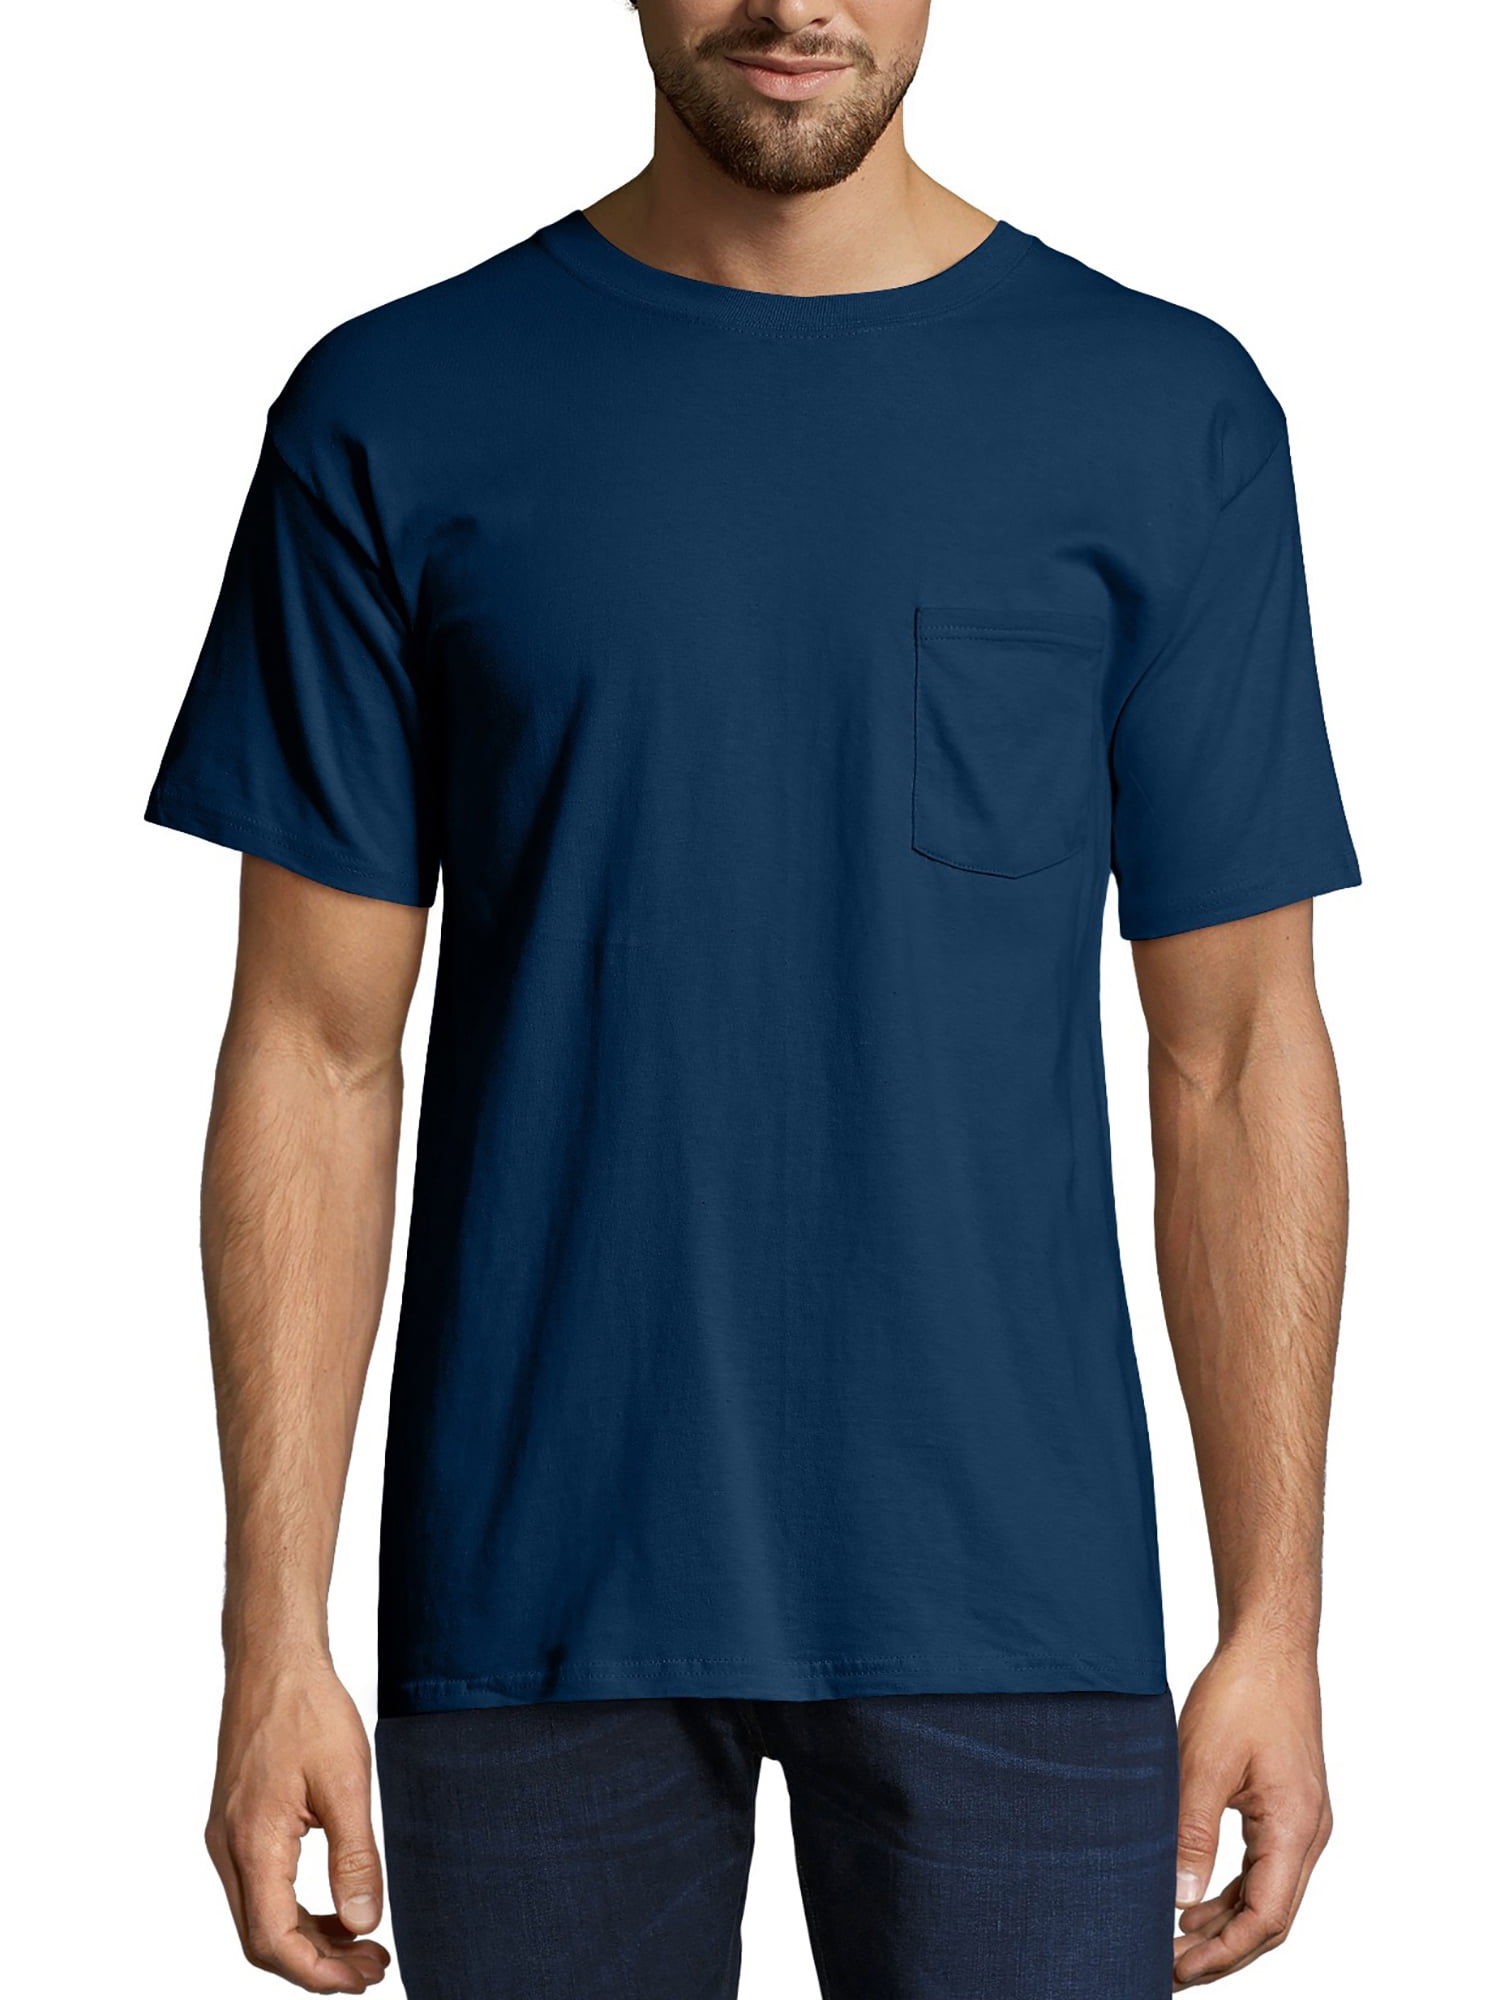 Hanes Men's Premium Beefy-T Short Sleeve T-Shirt With Pocket, up to ...